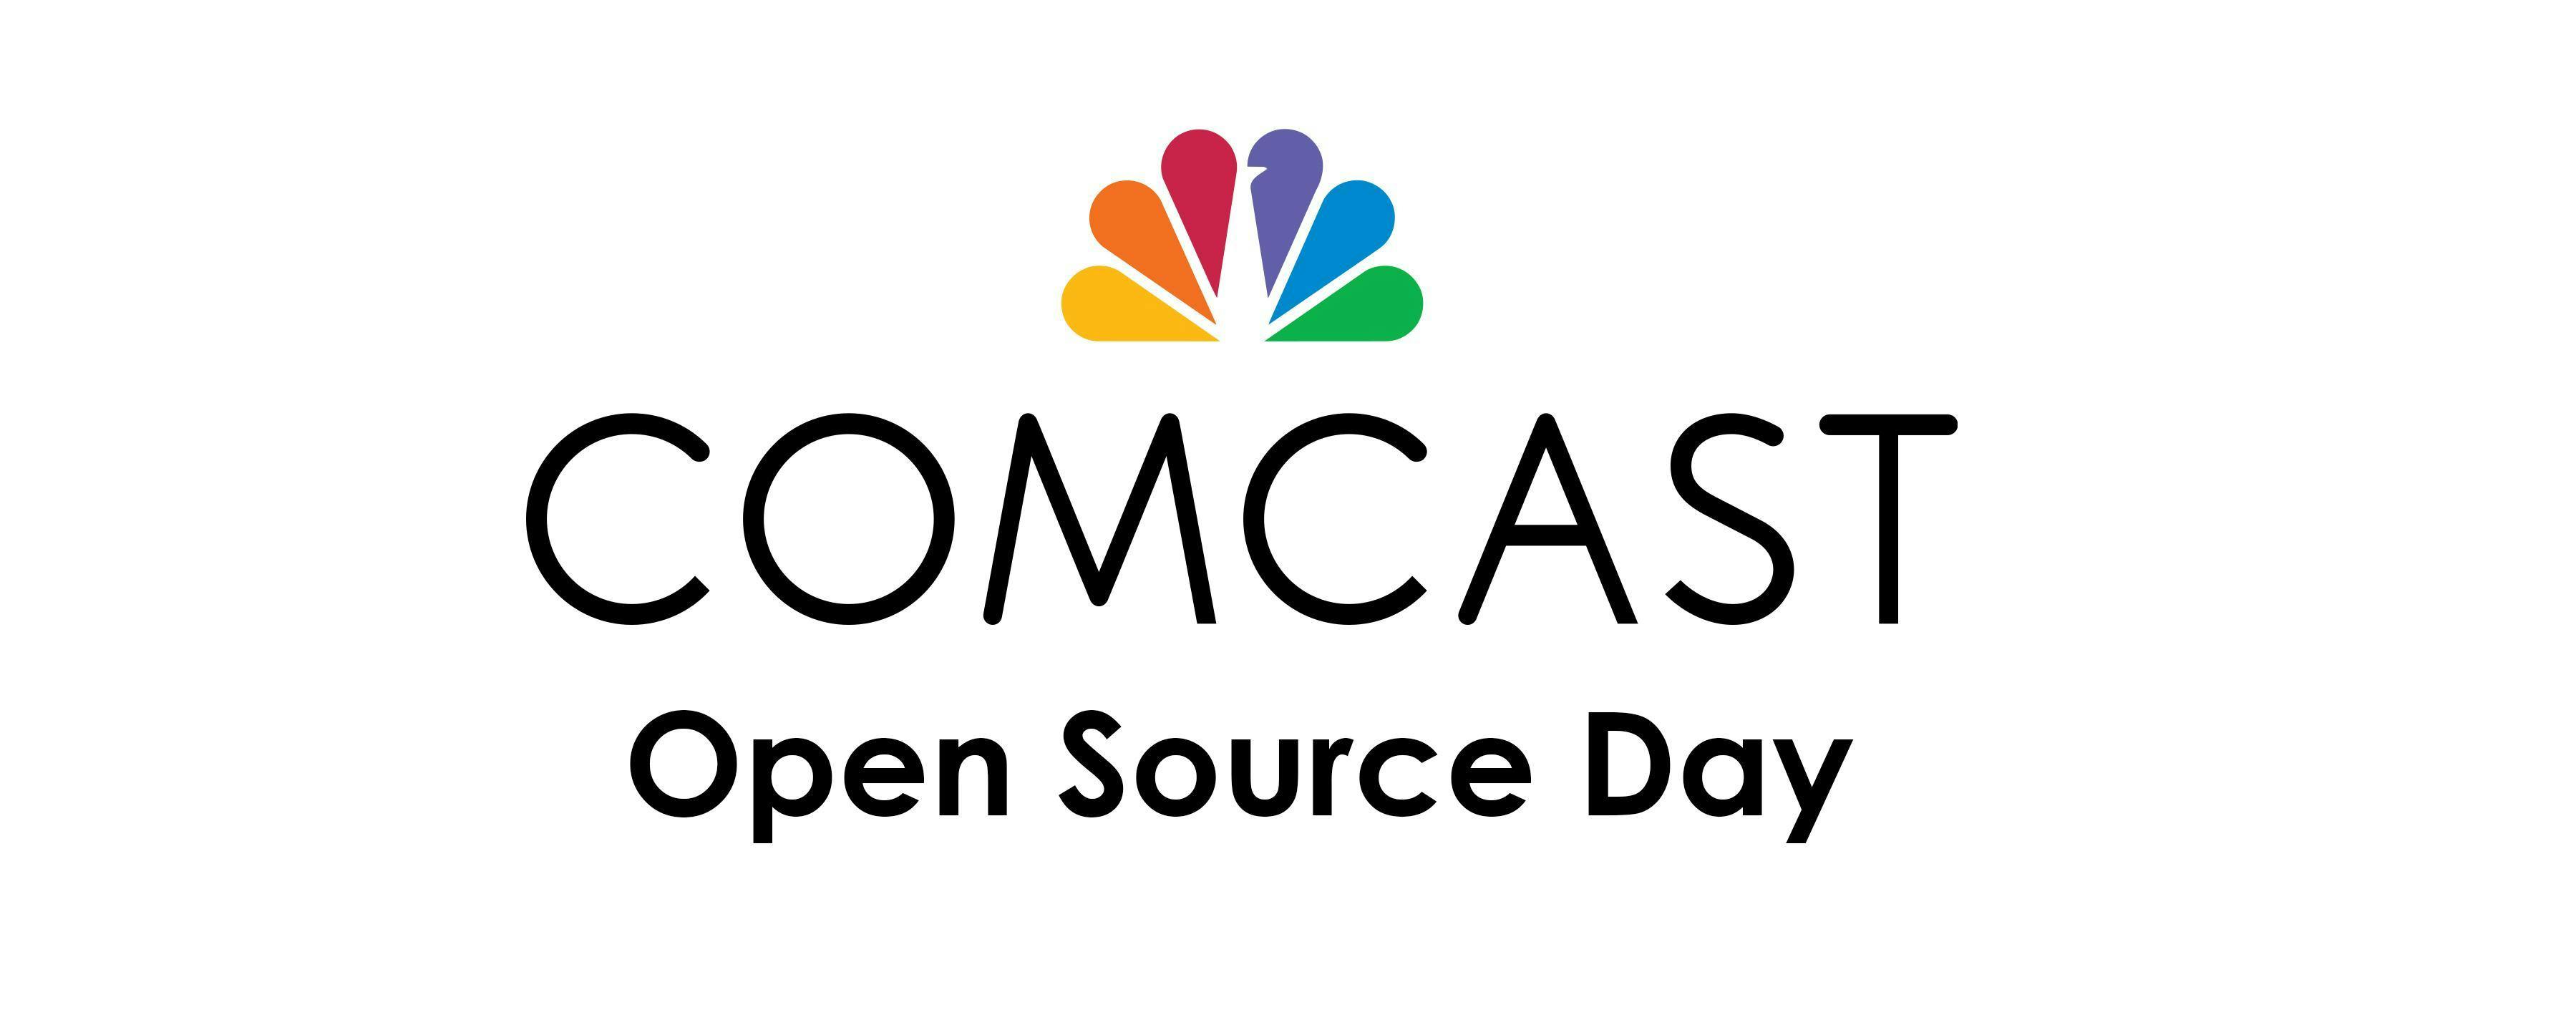 Comcast Open Source Day